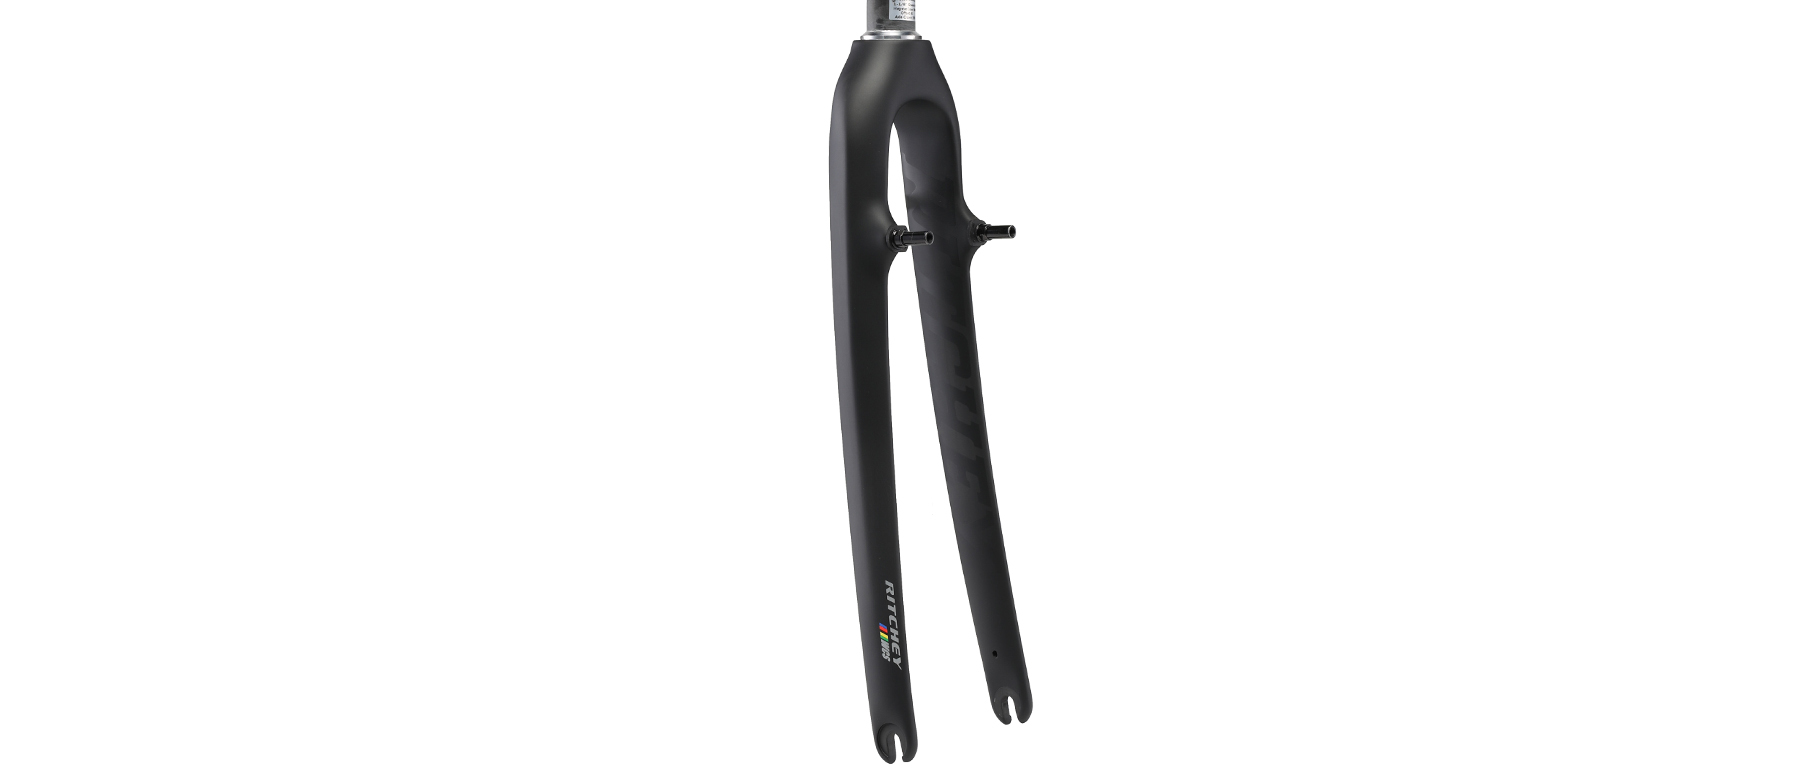 Ritchey WCS Carbon Cross Cantilever Fork